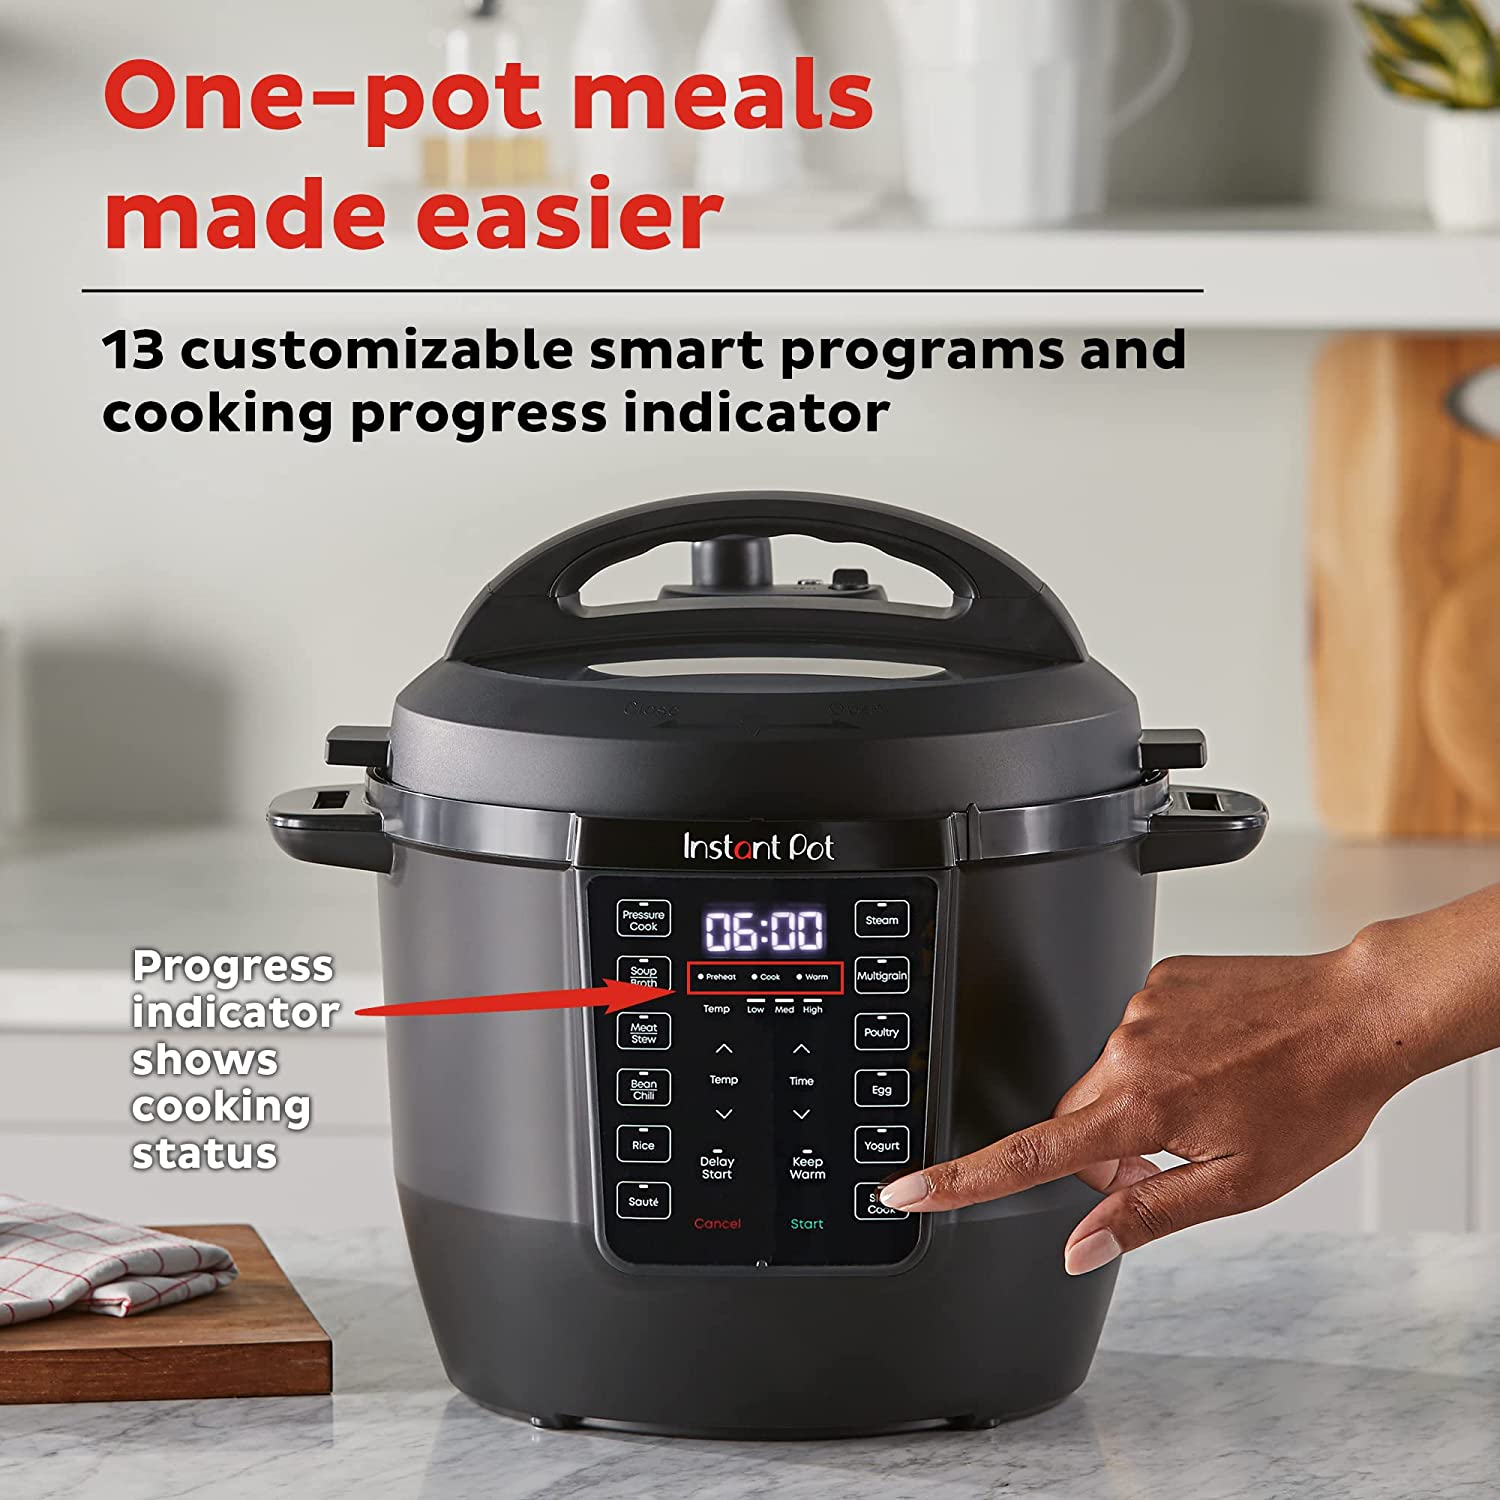 https://bigbigmart.com/wp-content/uploads/2023/07/Instant-Pot-RIO-Formerly-Known-as-Duo-7-in-1-Electric-Multi-Cooker-Pressure-Cooker-Slow-Cooker-Rice-Cooker-Steamer-Saute-Yogurt-Maker-Warmer-Includes-App-With-Over-800-Recipes-6-Quart4.jpg